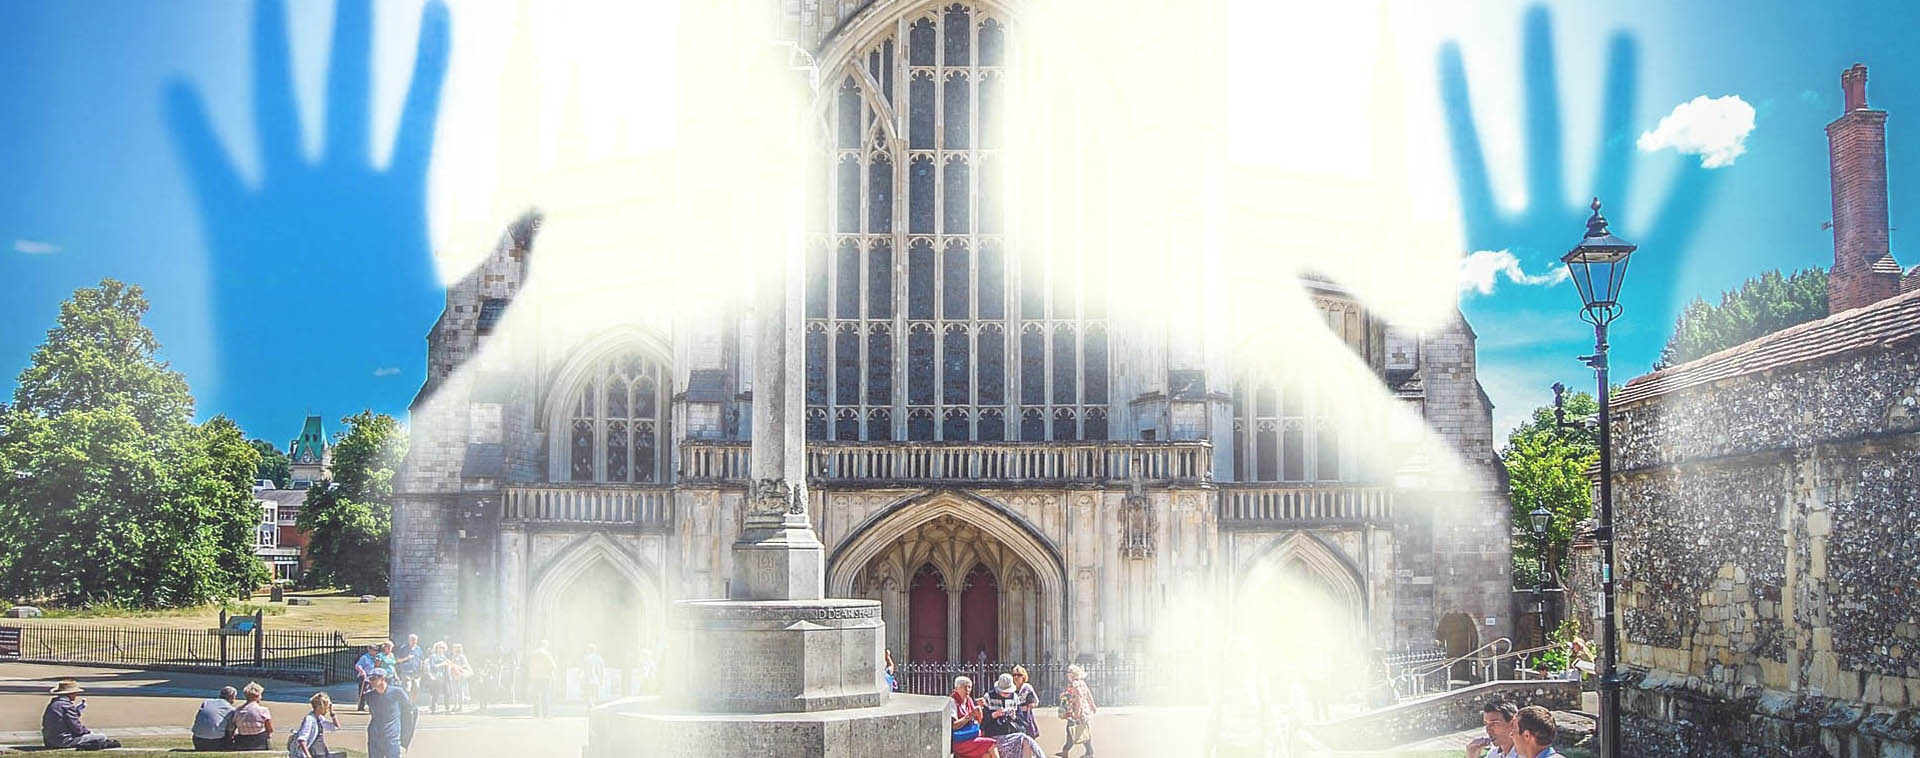 Quirky Treasure Trails - We have two ghost hunting Trails for you to explore Winchester with...